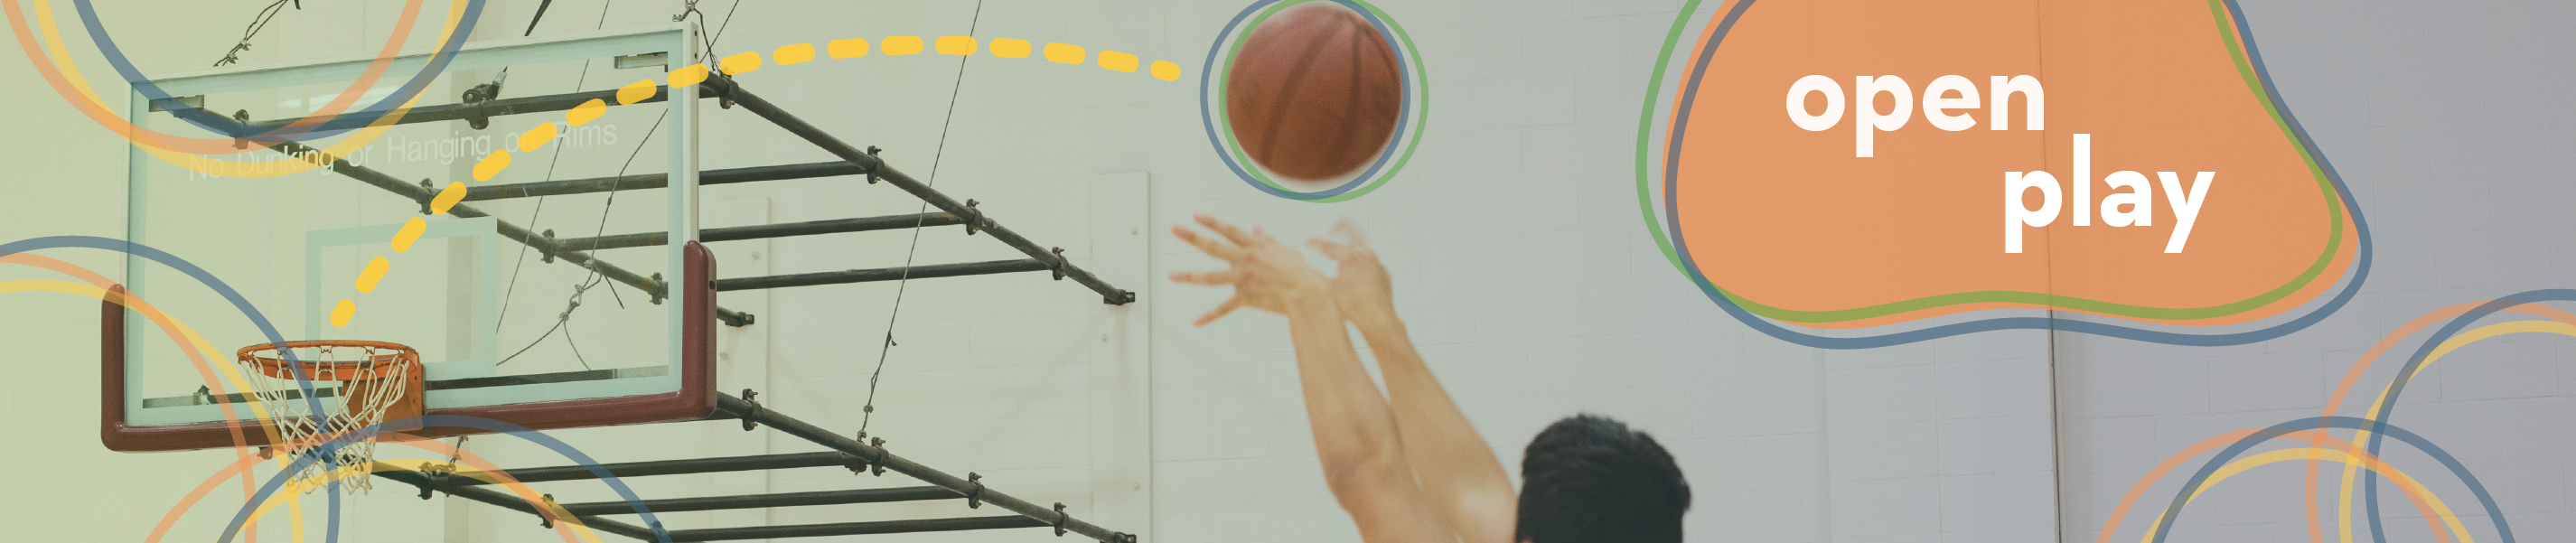 image of a person shooting a basket in the north gym with small illustrations and the header "open play"